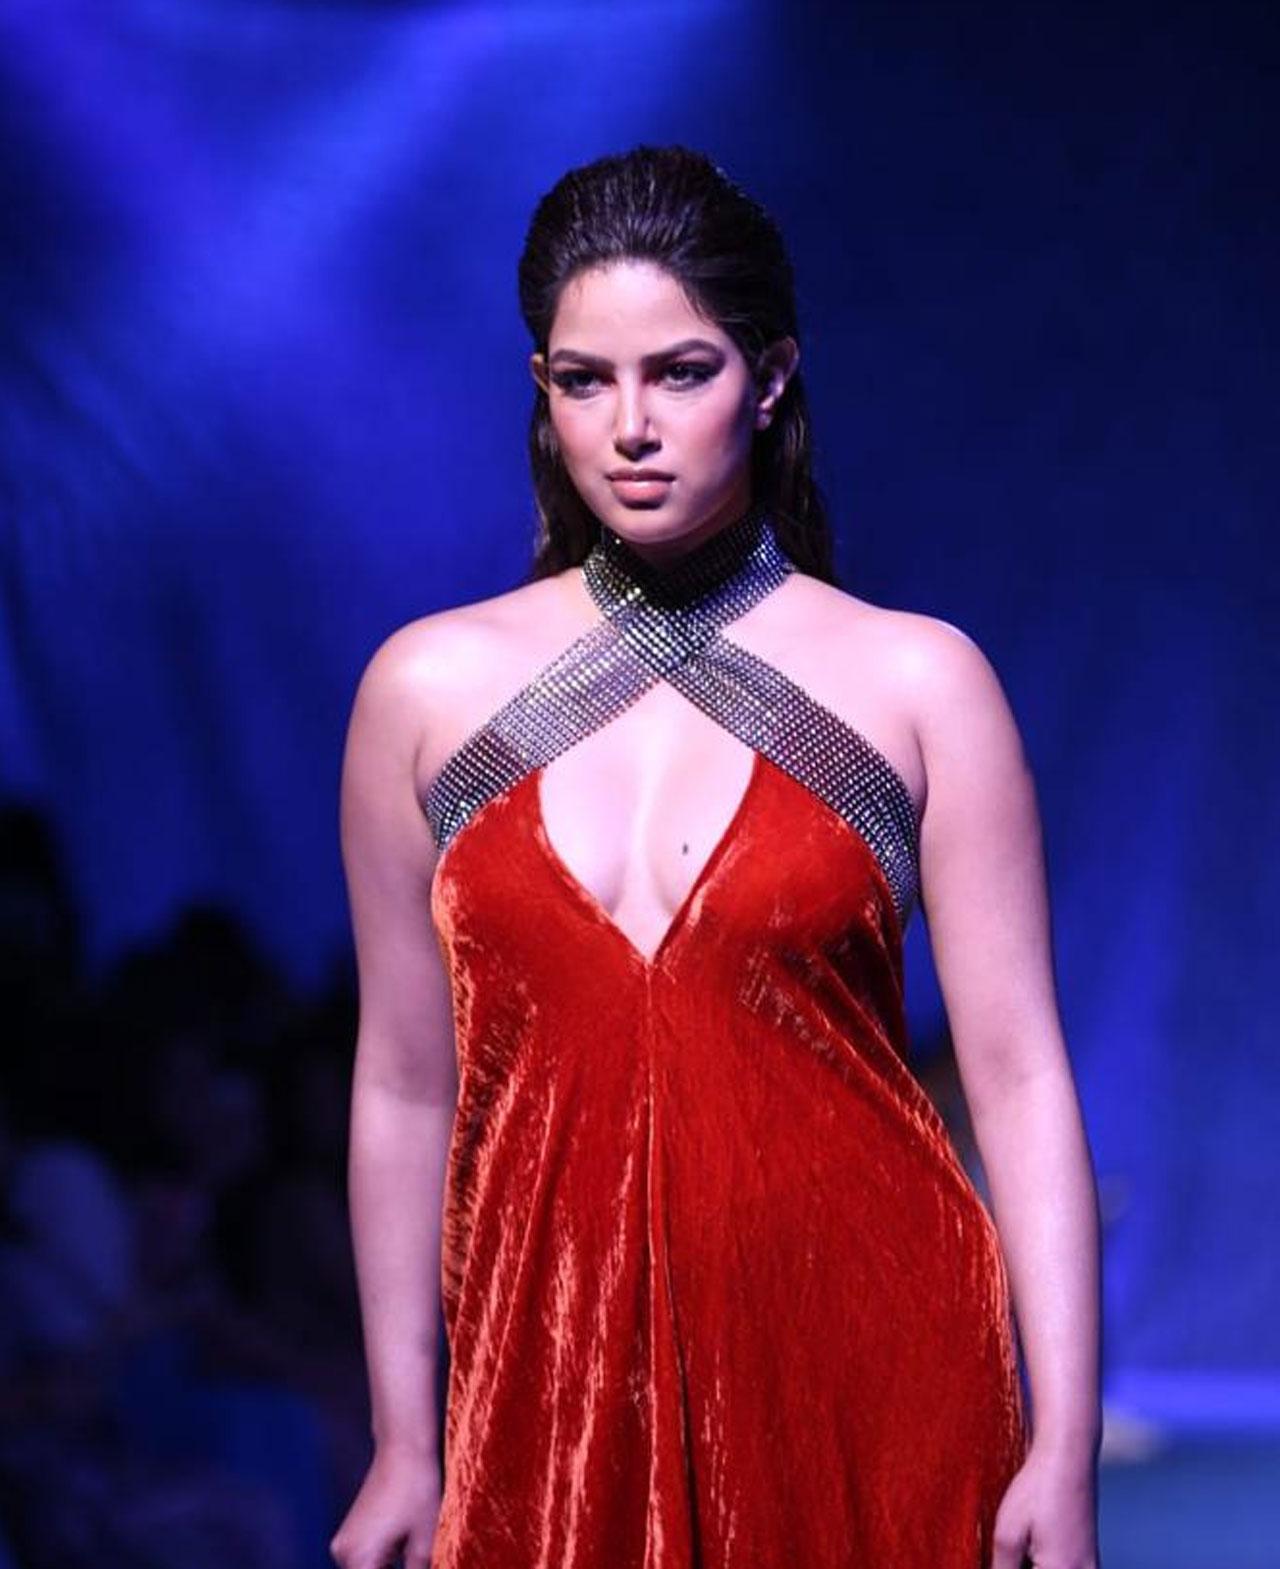 Miss Universe 2021 Harnaaz Kaur Sandhu walked the ramp this year at the Lakme Fashion Week of 2022. The beauty queen walked for designers Shiaan and Narresh and oozed grace, elan, and confidence in her stunning red velvet gown. 